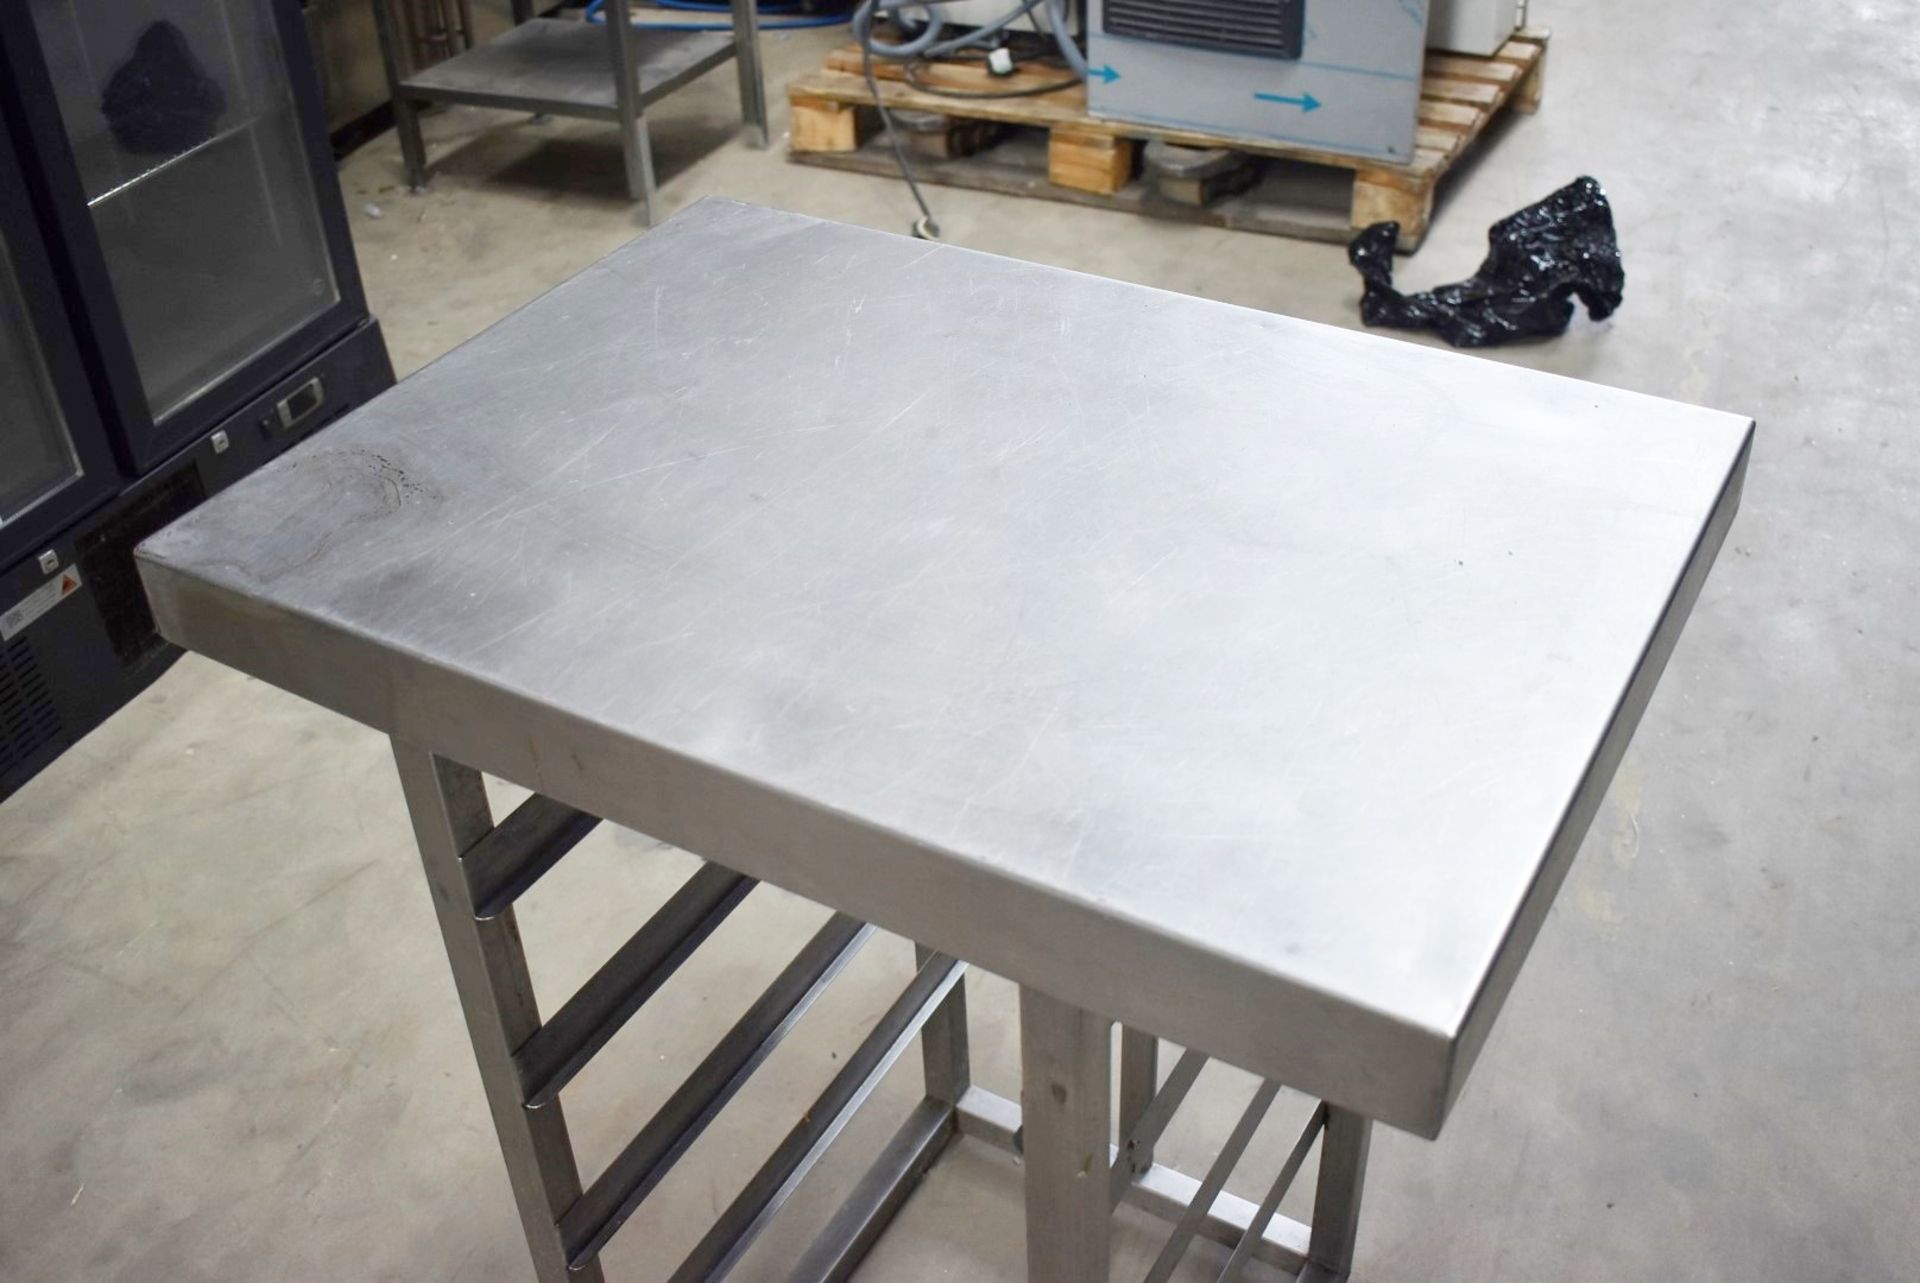 1 x Stainless Steel Prep Table With Tray Runners - Dimensions: H84 x W70 x D50 cms - Image 3 of 5